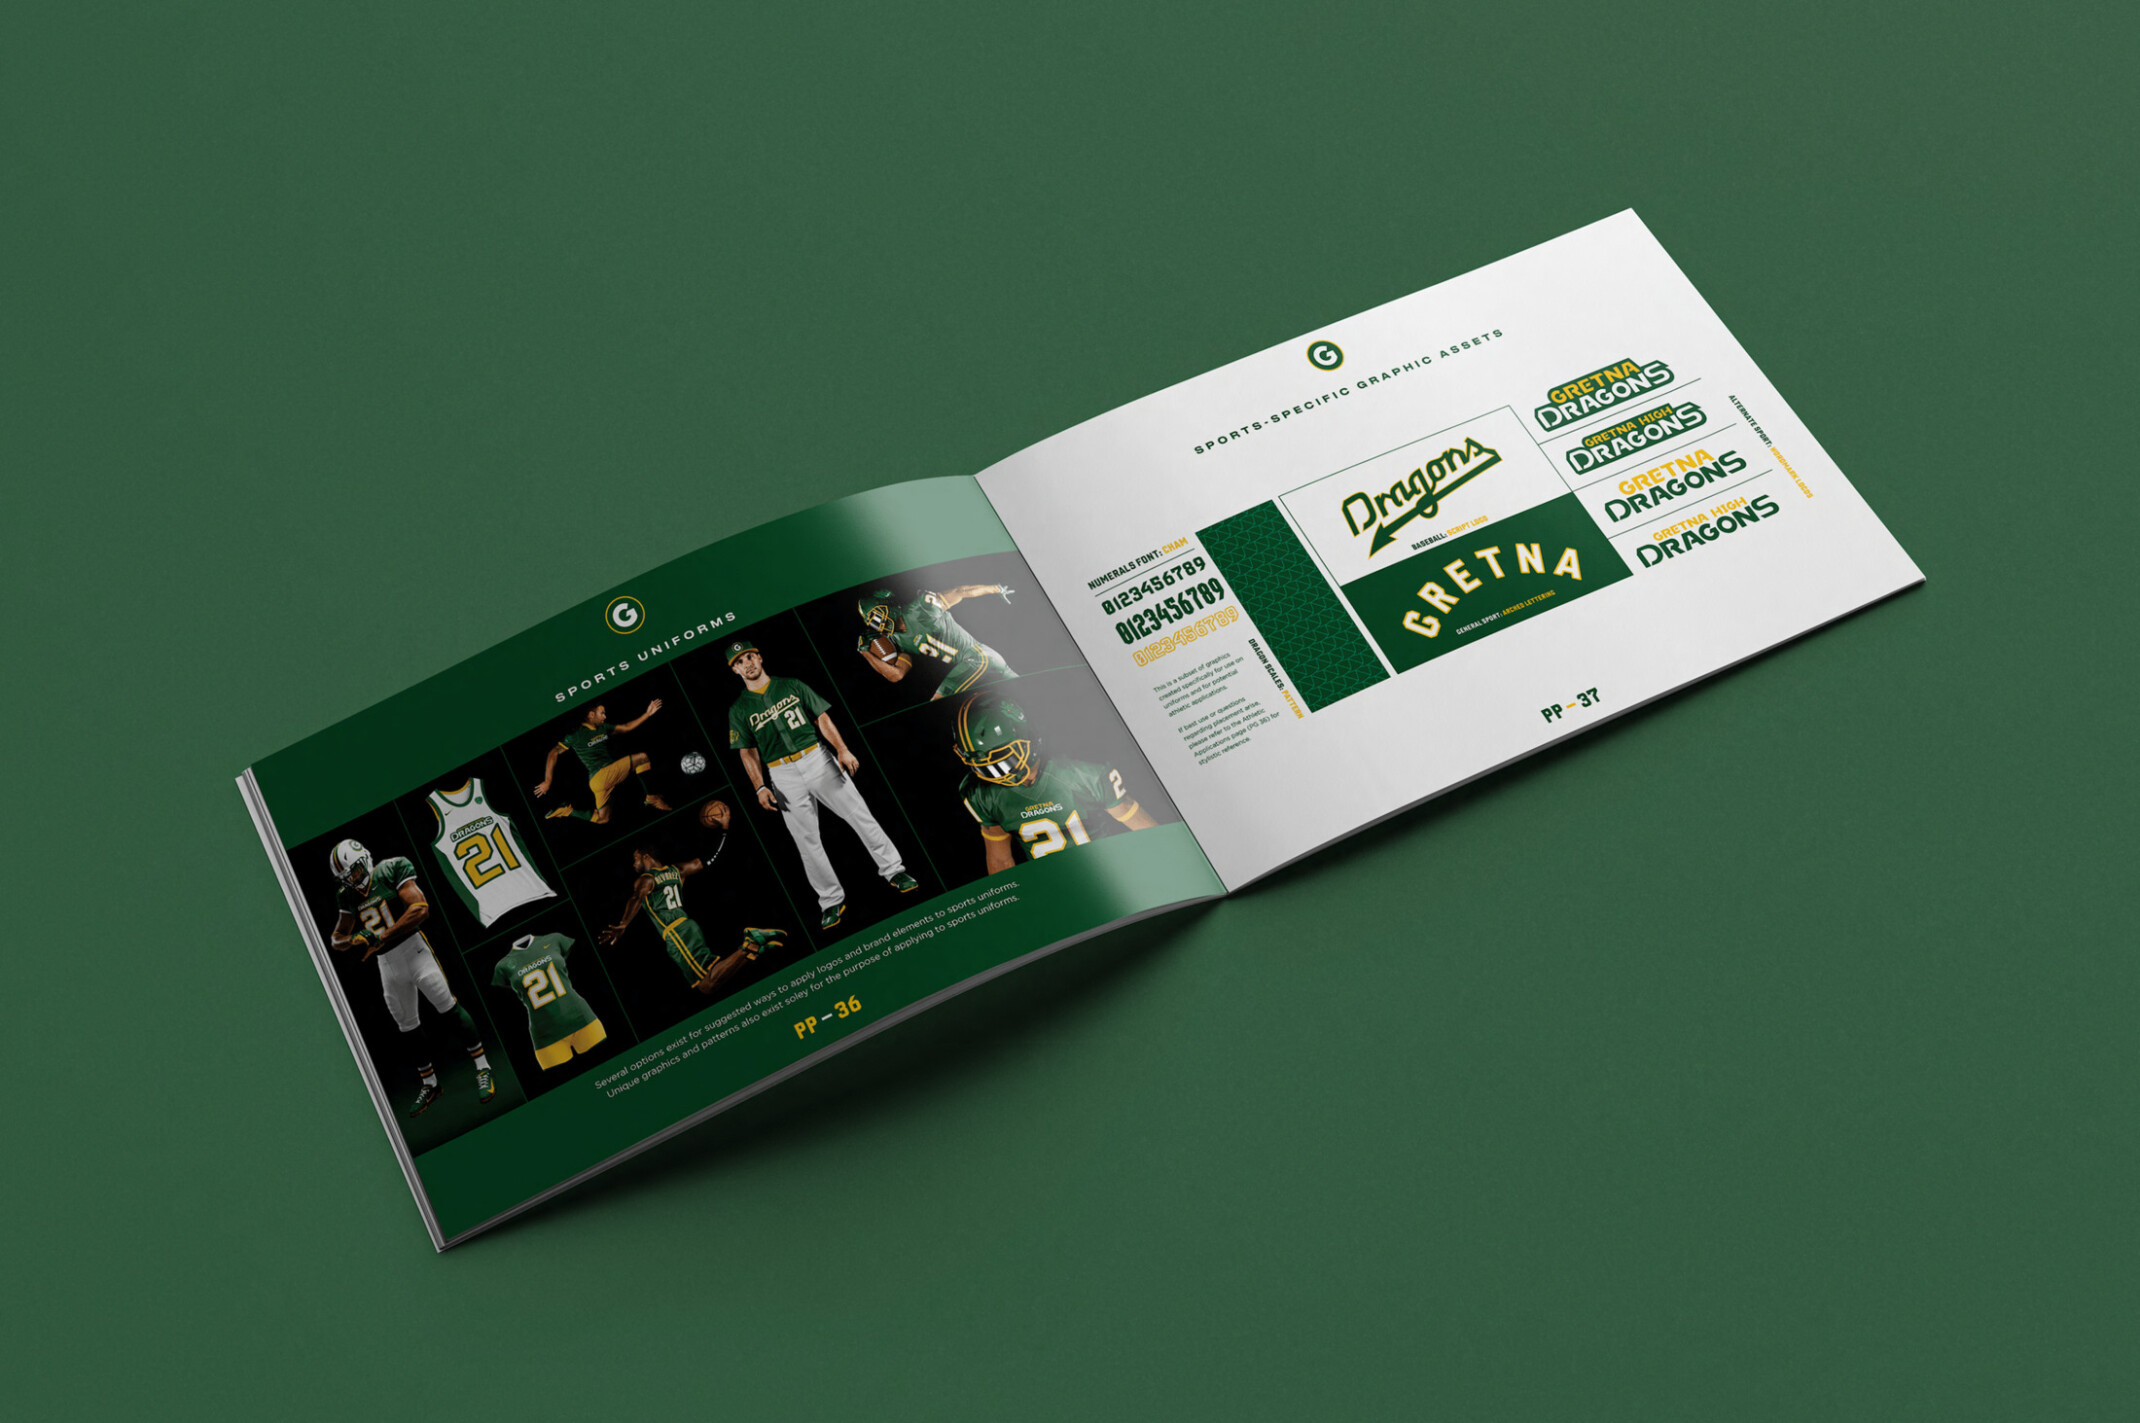 Brand book for Gretna High School Dragons, in Nebraska. Two page spread of logo treatments and color palettes